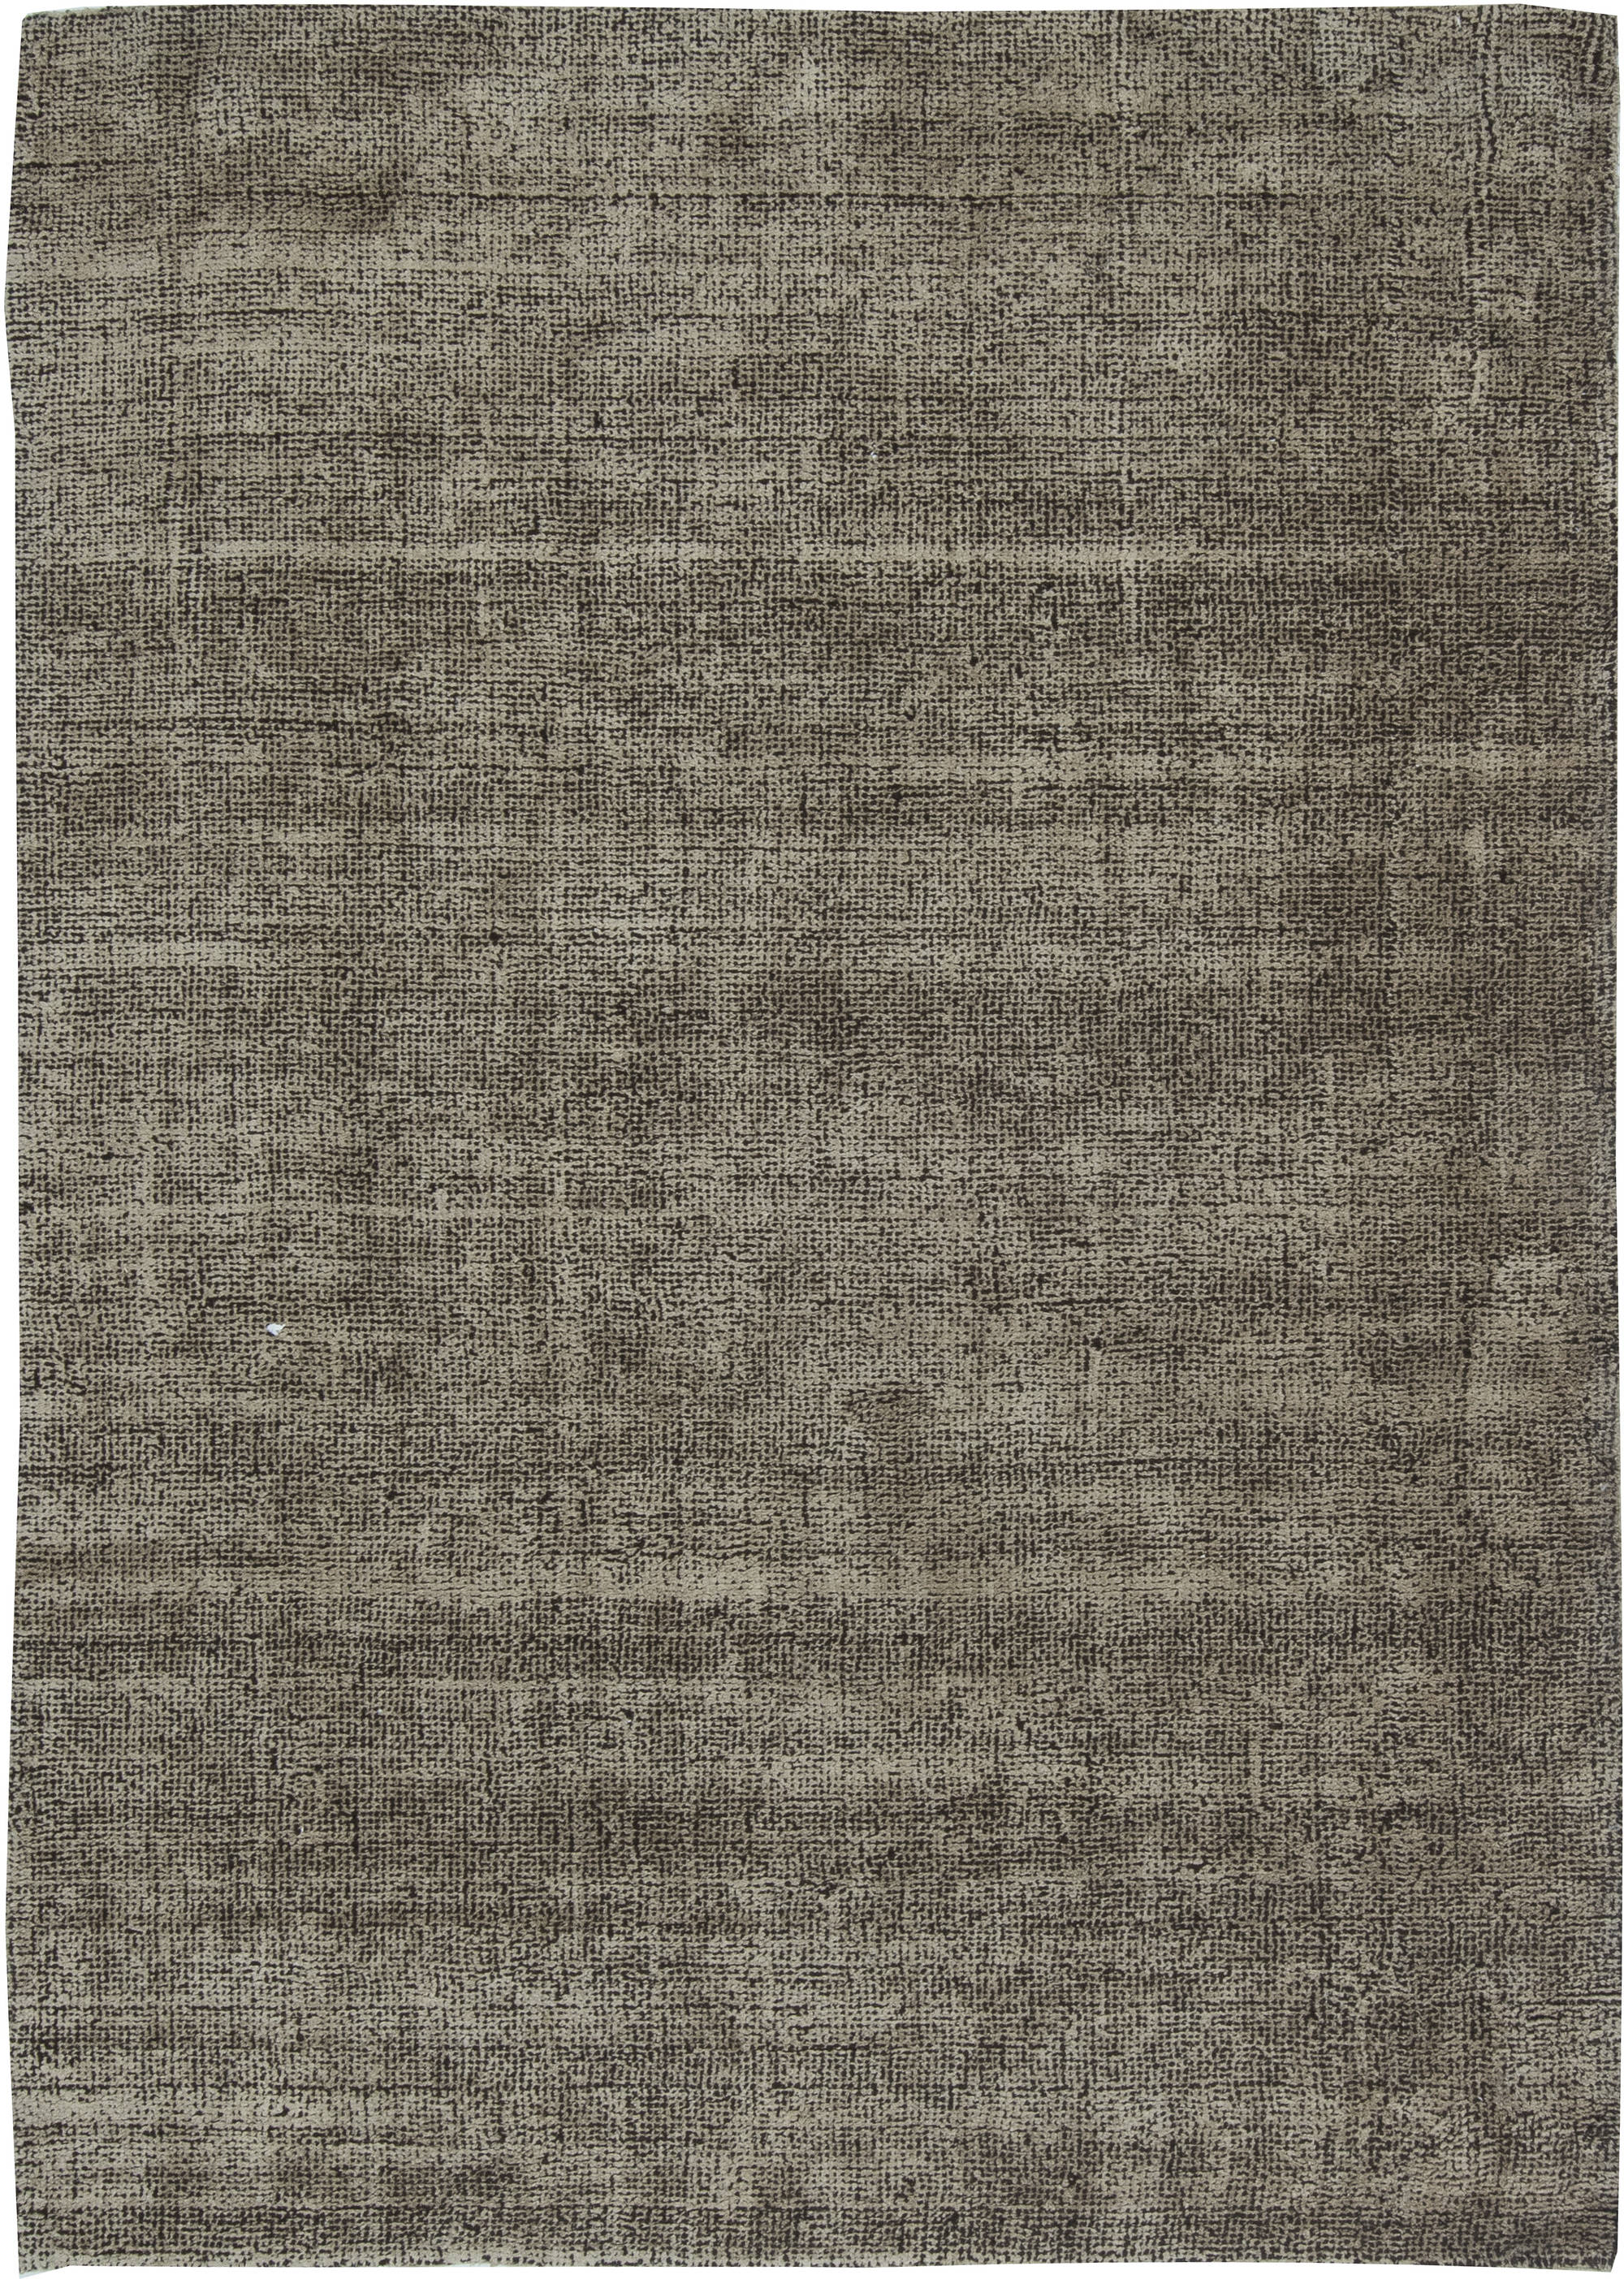 contemporary rugs contemporary rug n11531 QYQFNMR